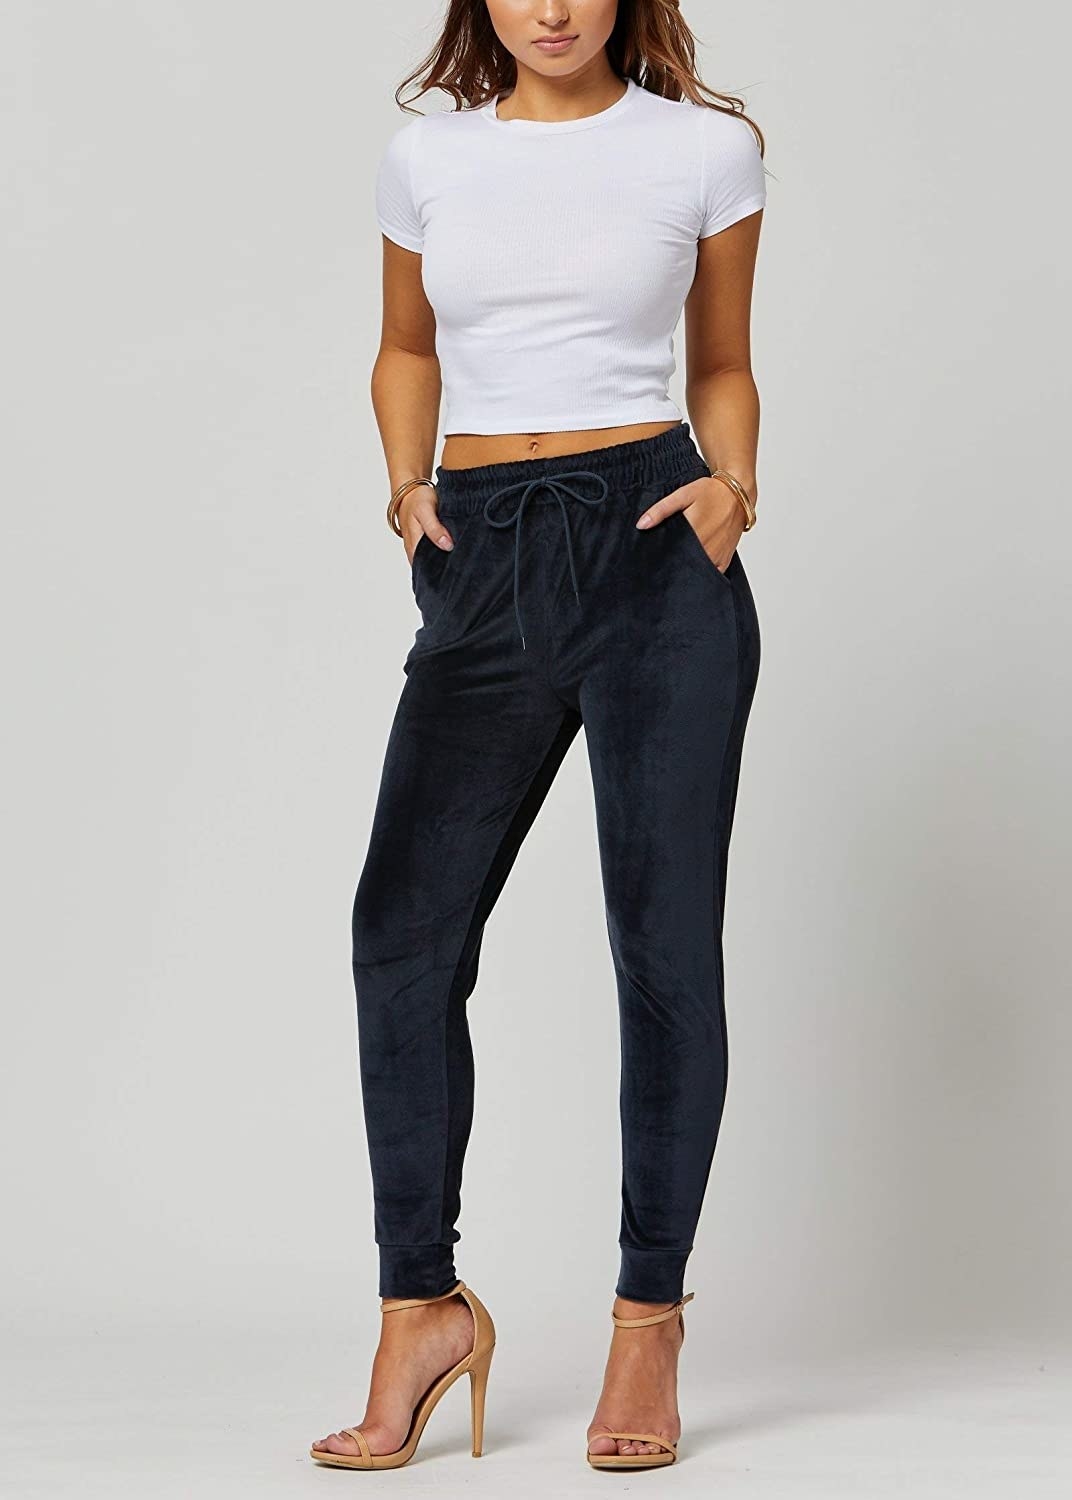 Model in the navy blue slim cut joggers